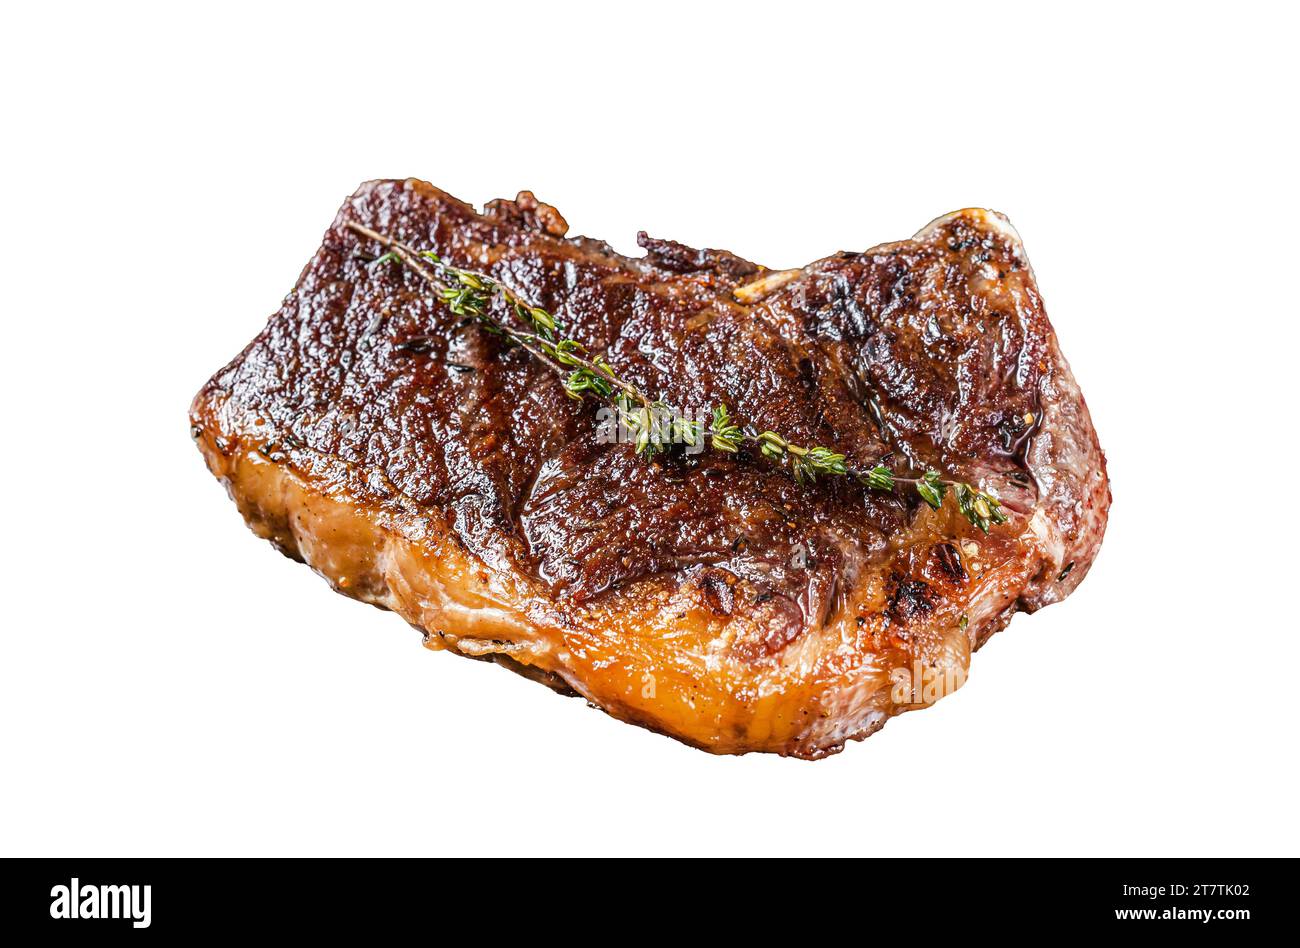 Grilled Striploin beef meat steak or new york steak on a grill rack. Isolated, white background Stock Photo